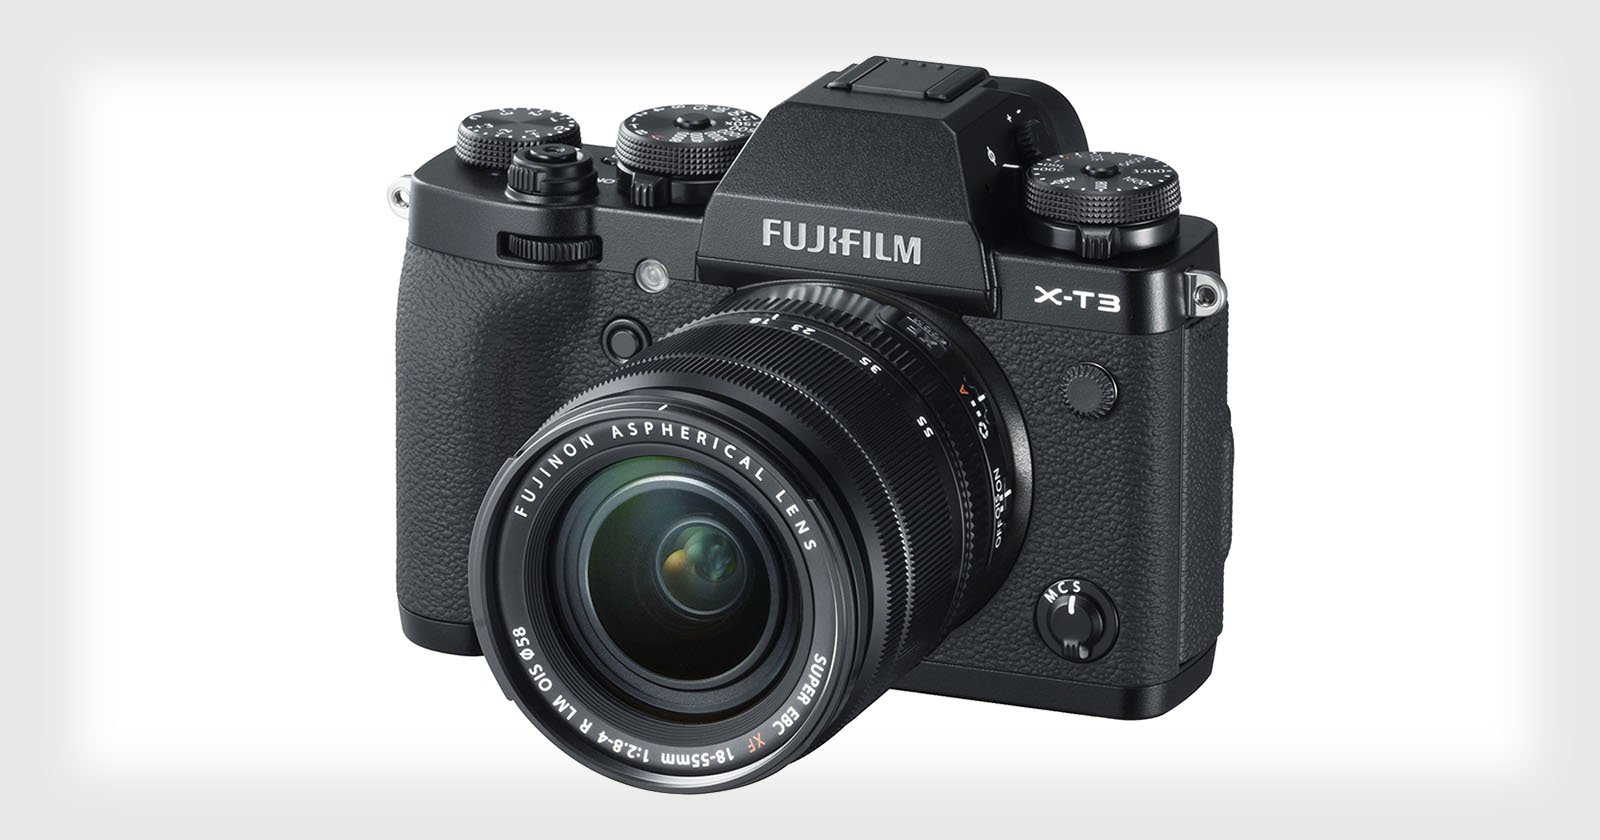 Fujifilm Unveils the X-T3 with a 26MP X-Trans Sensor and 4K/60p Video